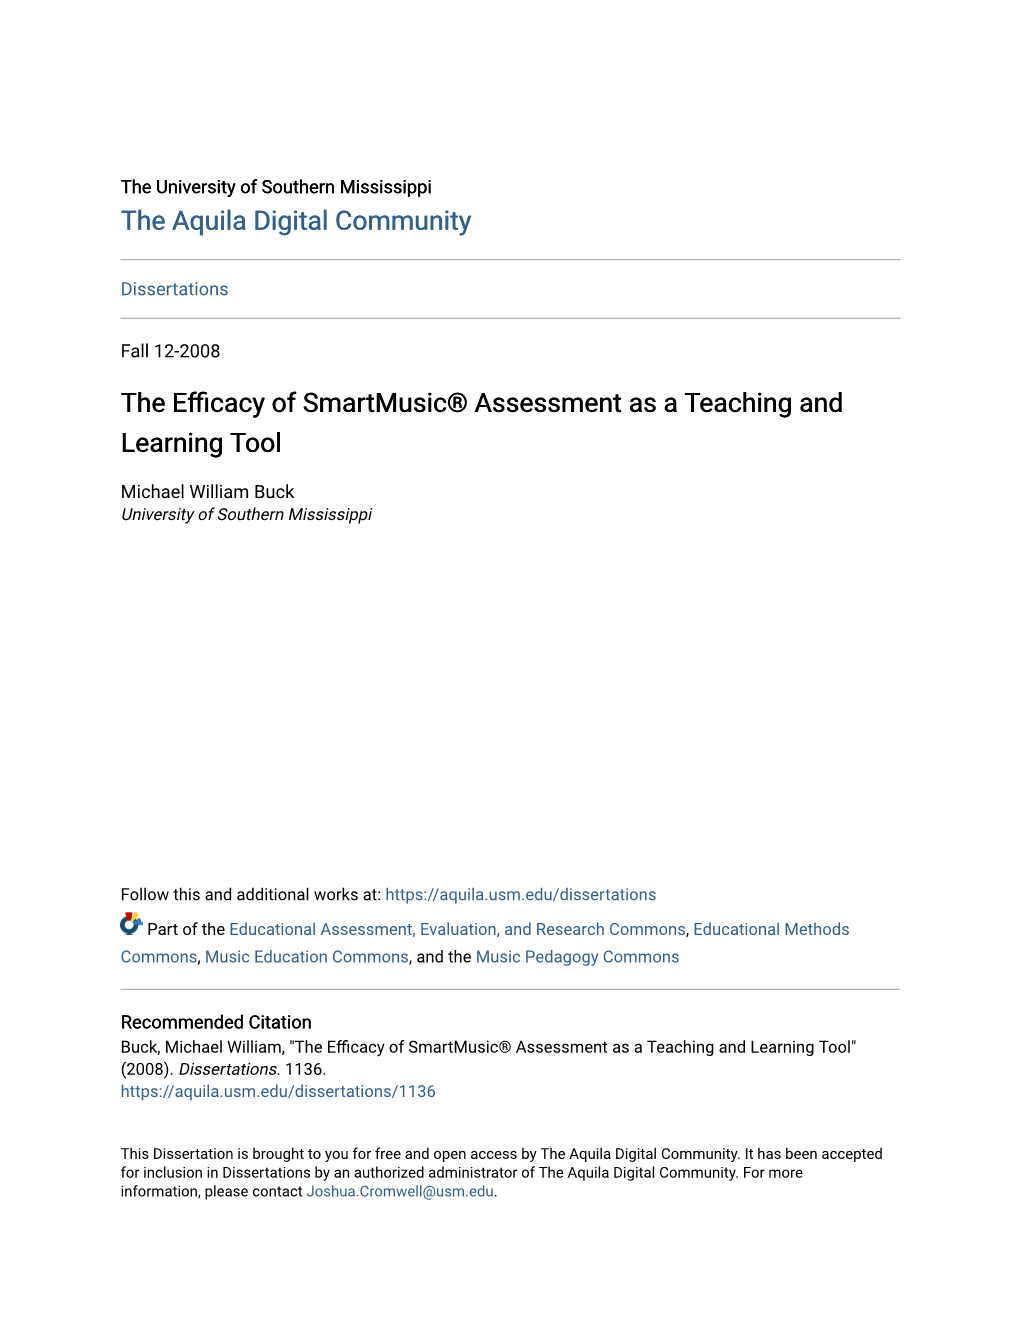 The Efficacy of Smartmusic® Assessment As a Teaching and Learning Tool